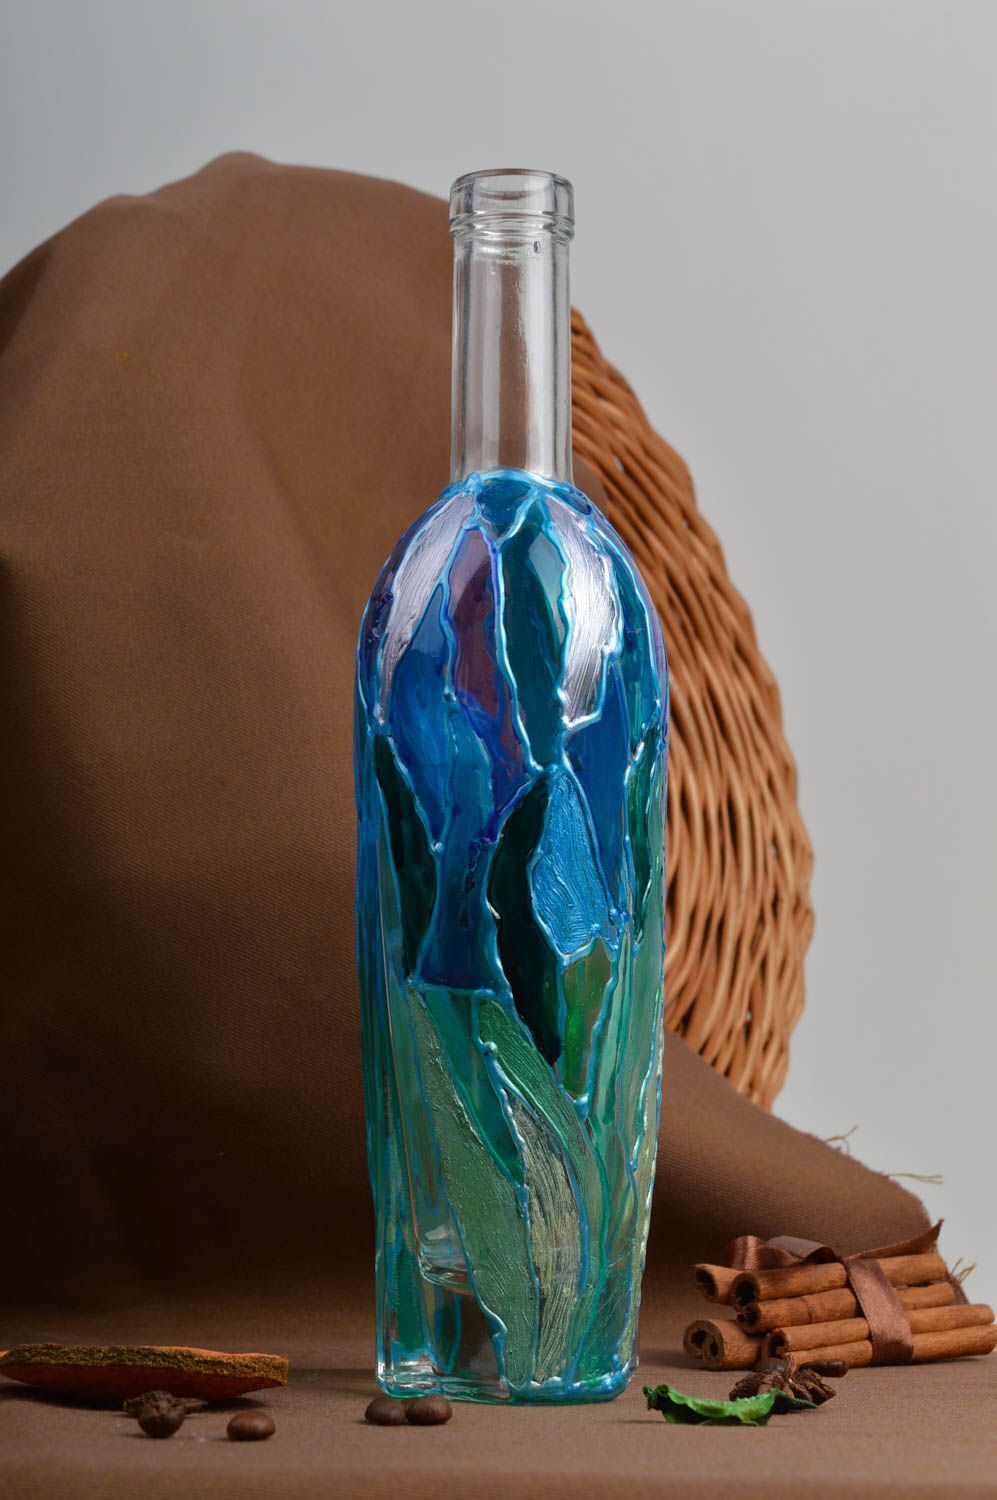 Elegant 11 inches tall vase glass in blue and green colors handmade décor 15 oz, 1,4 lb photo 1